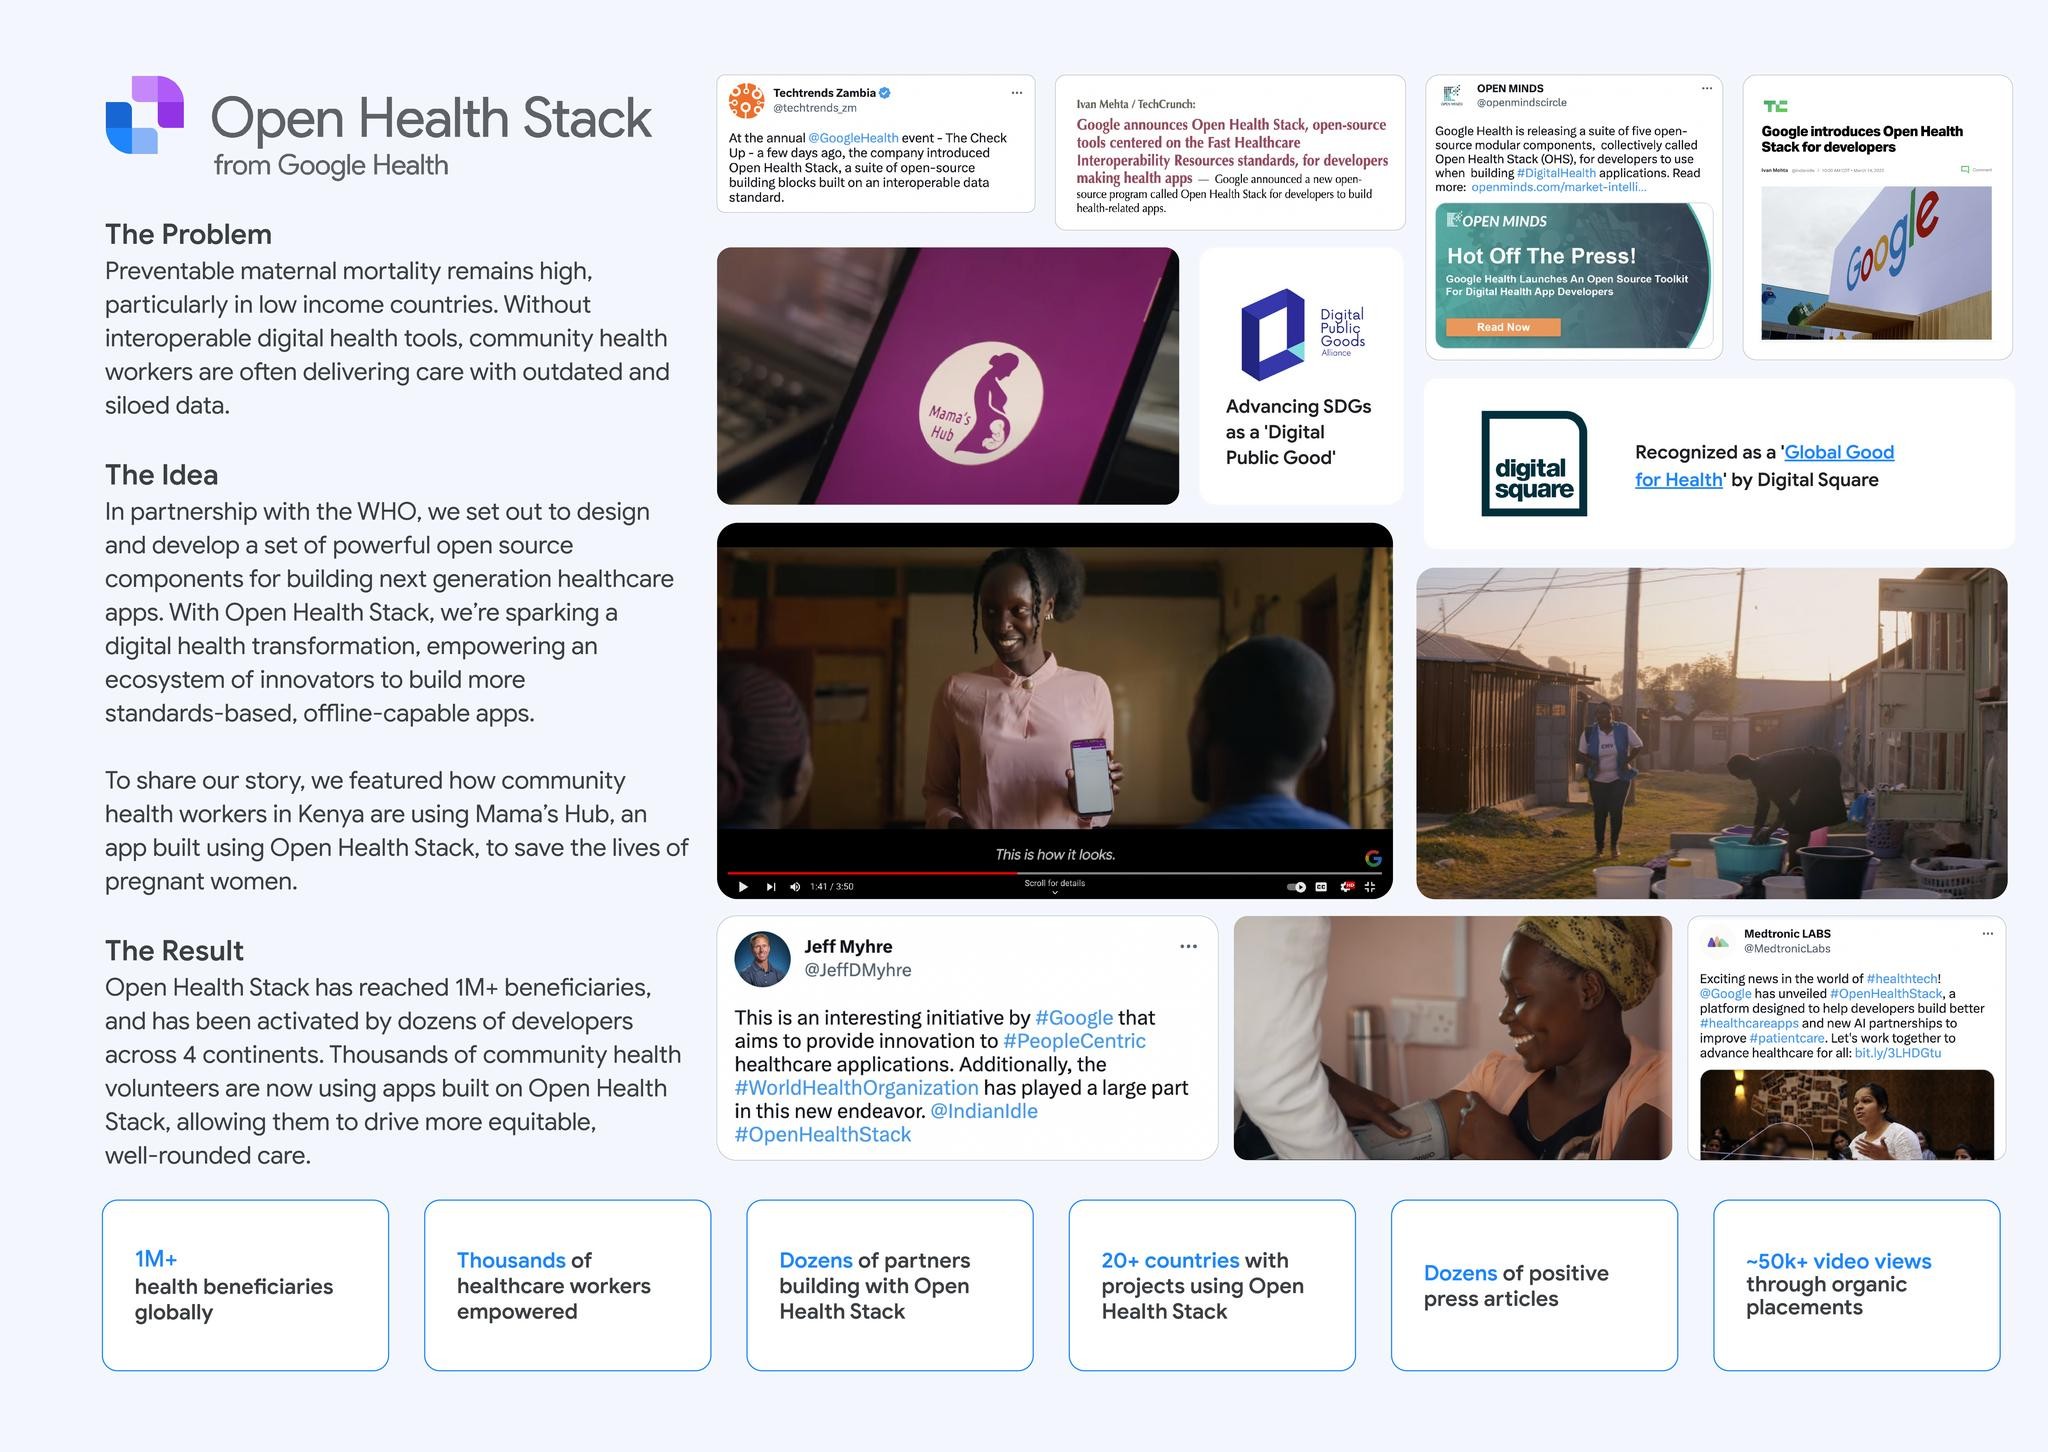 MAMA'S HUB, BUILT ON OPEN HEALTH STACK